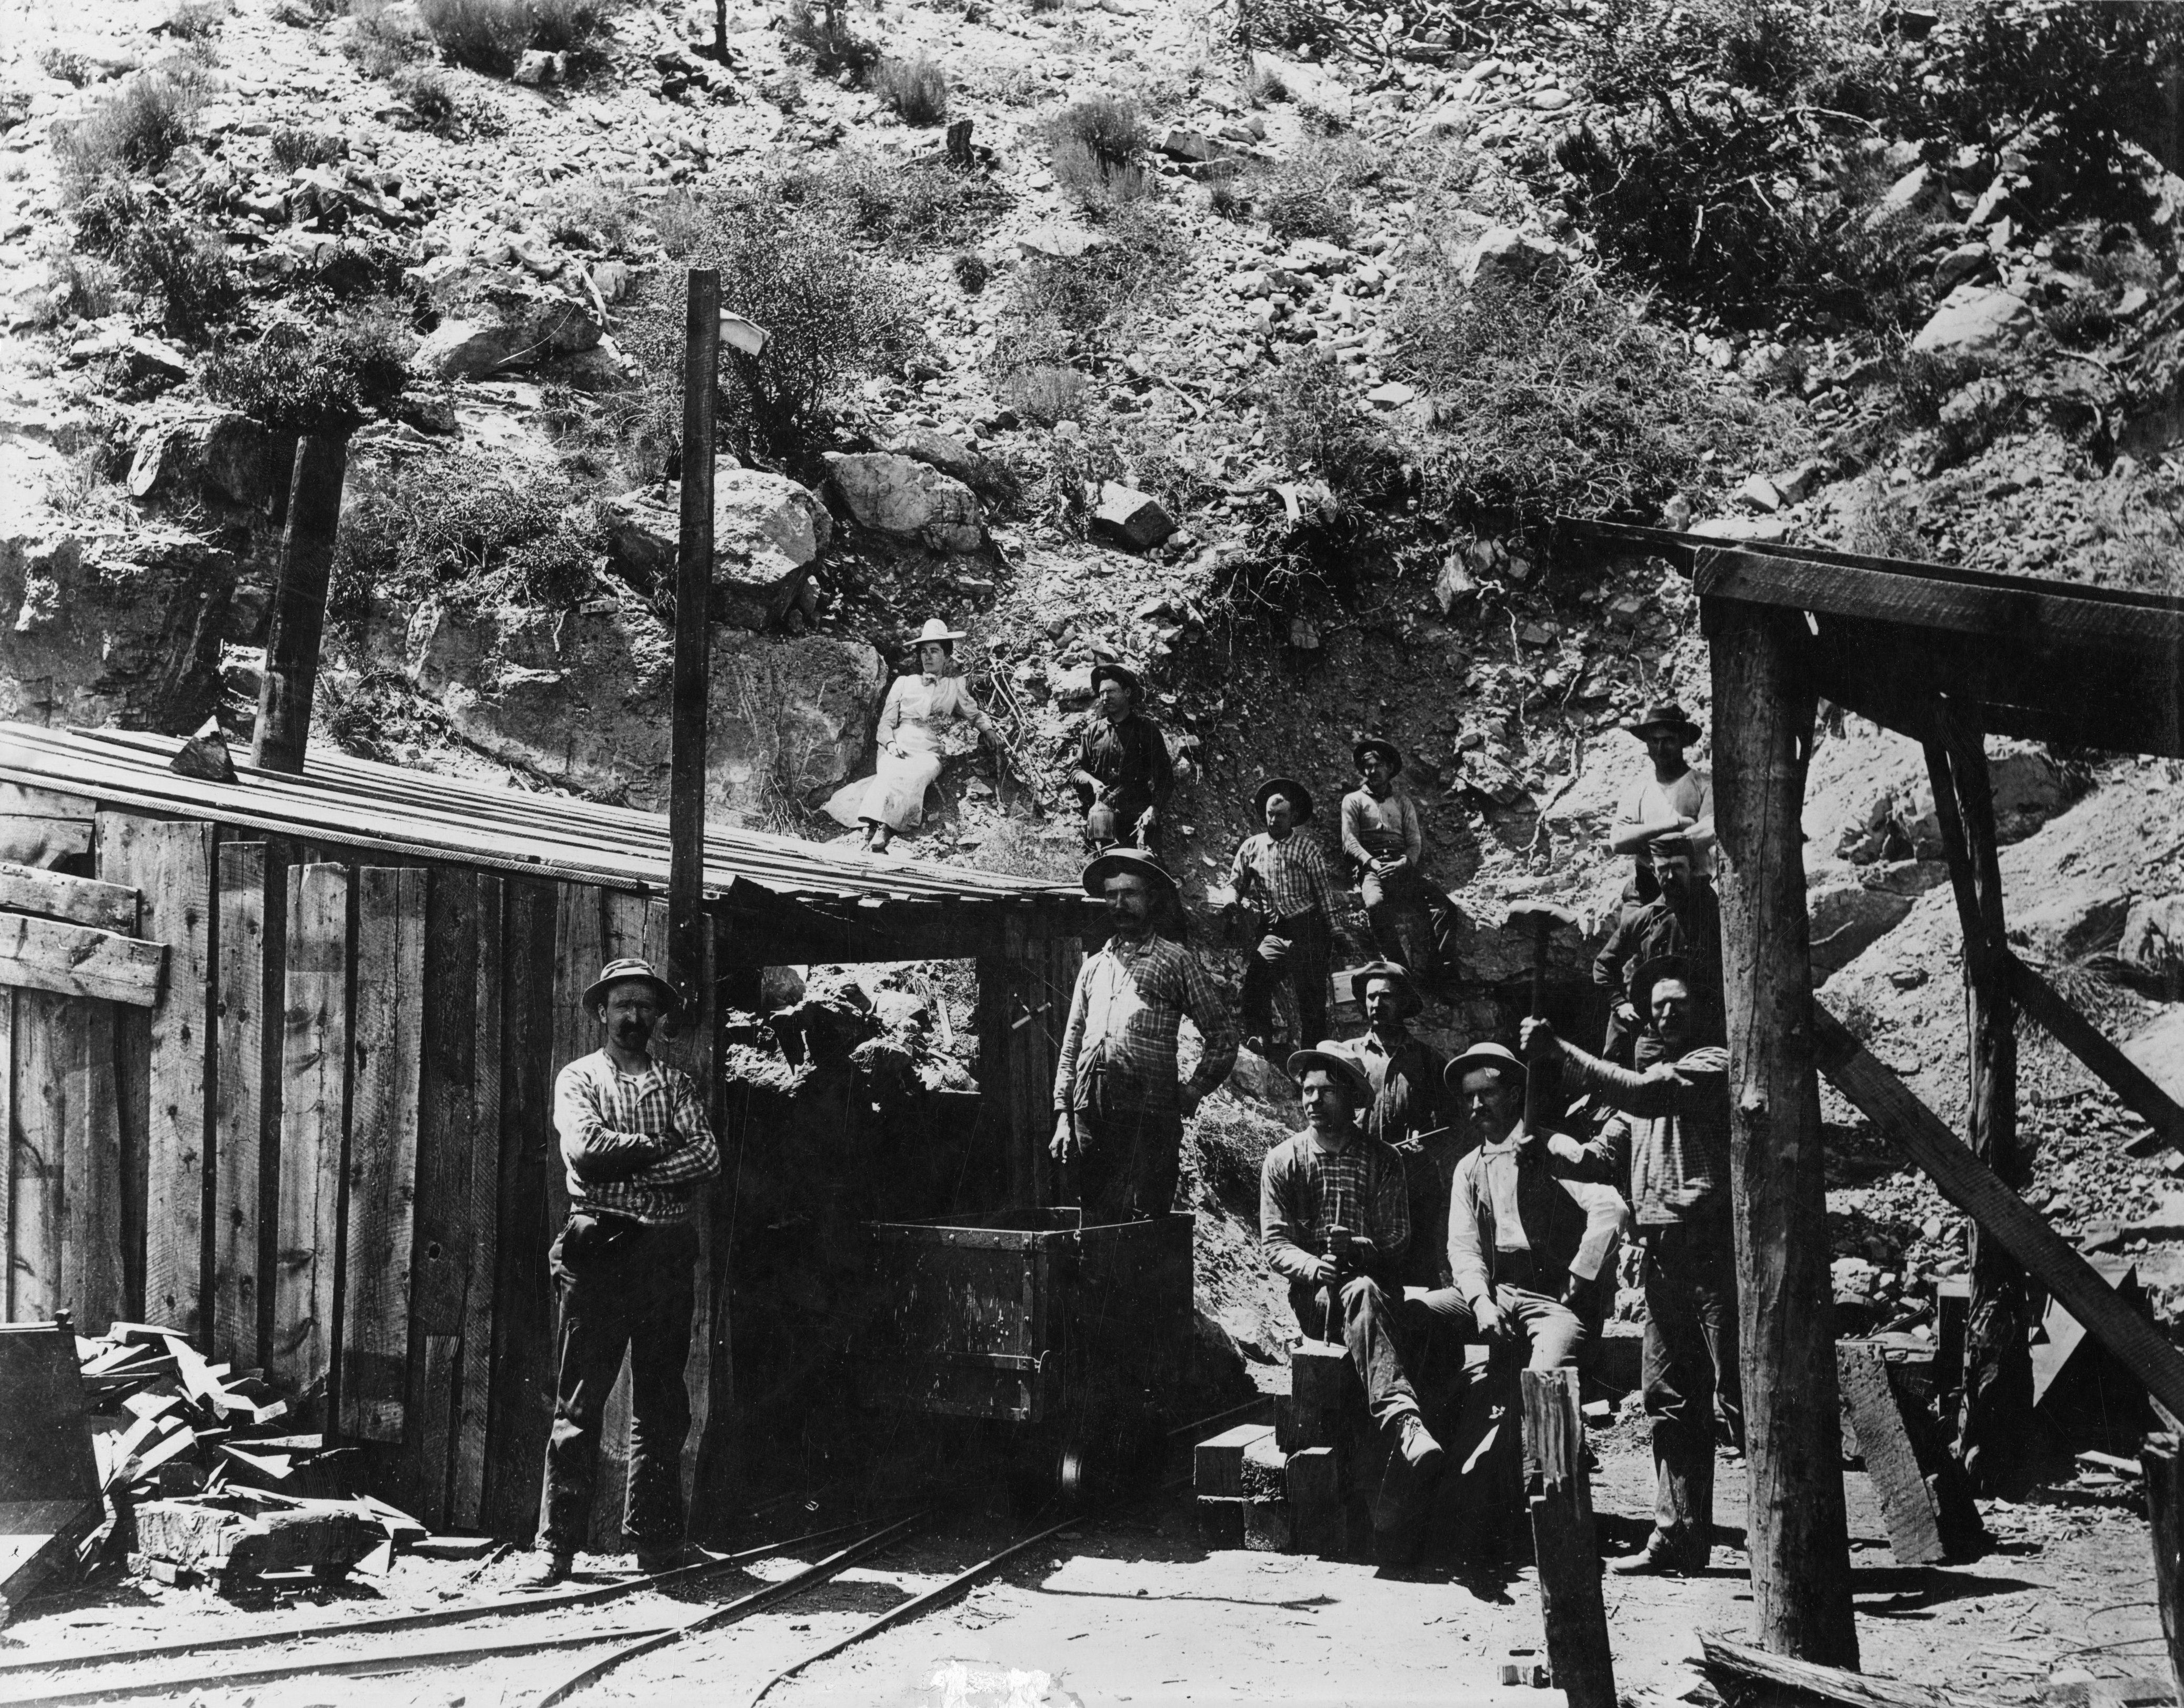 People gathered around the entrance to the Apex Mine